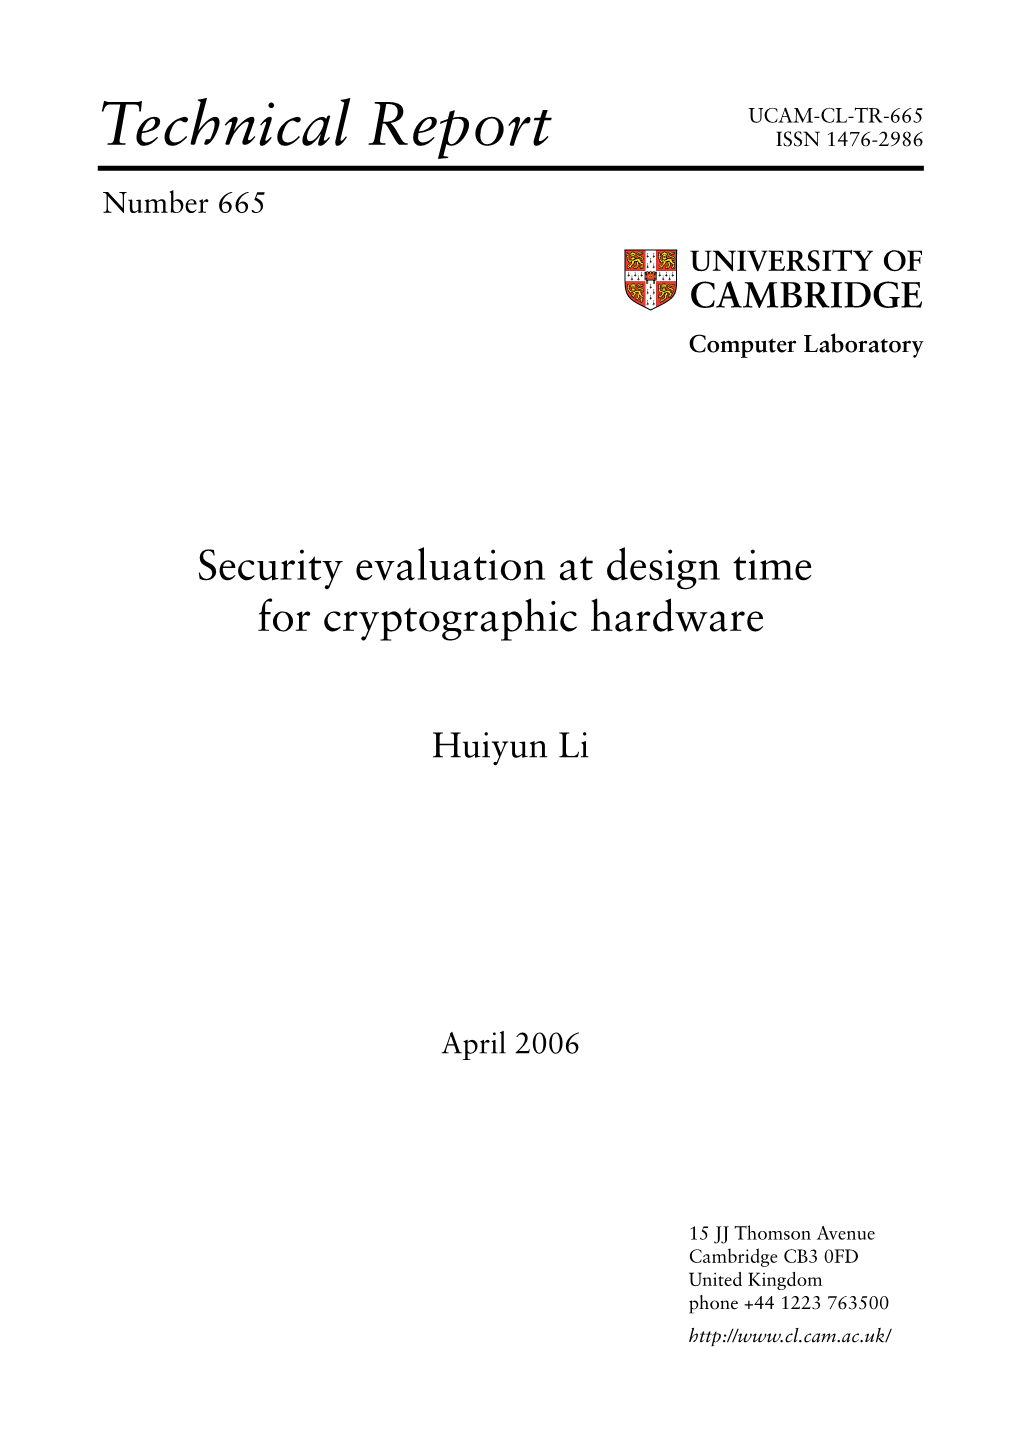 Security Evaluation at Design Time for Cryptographic Hardware